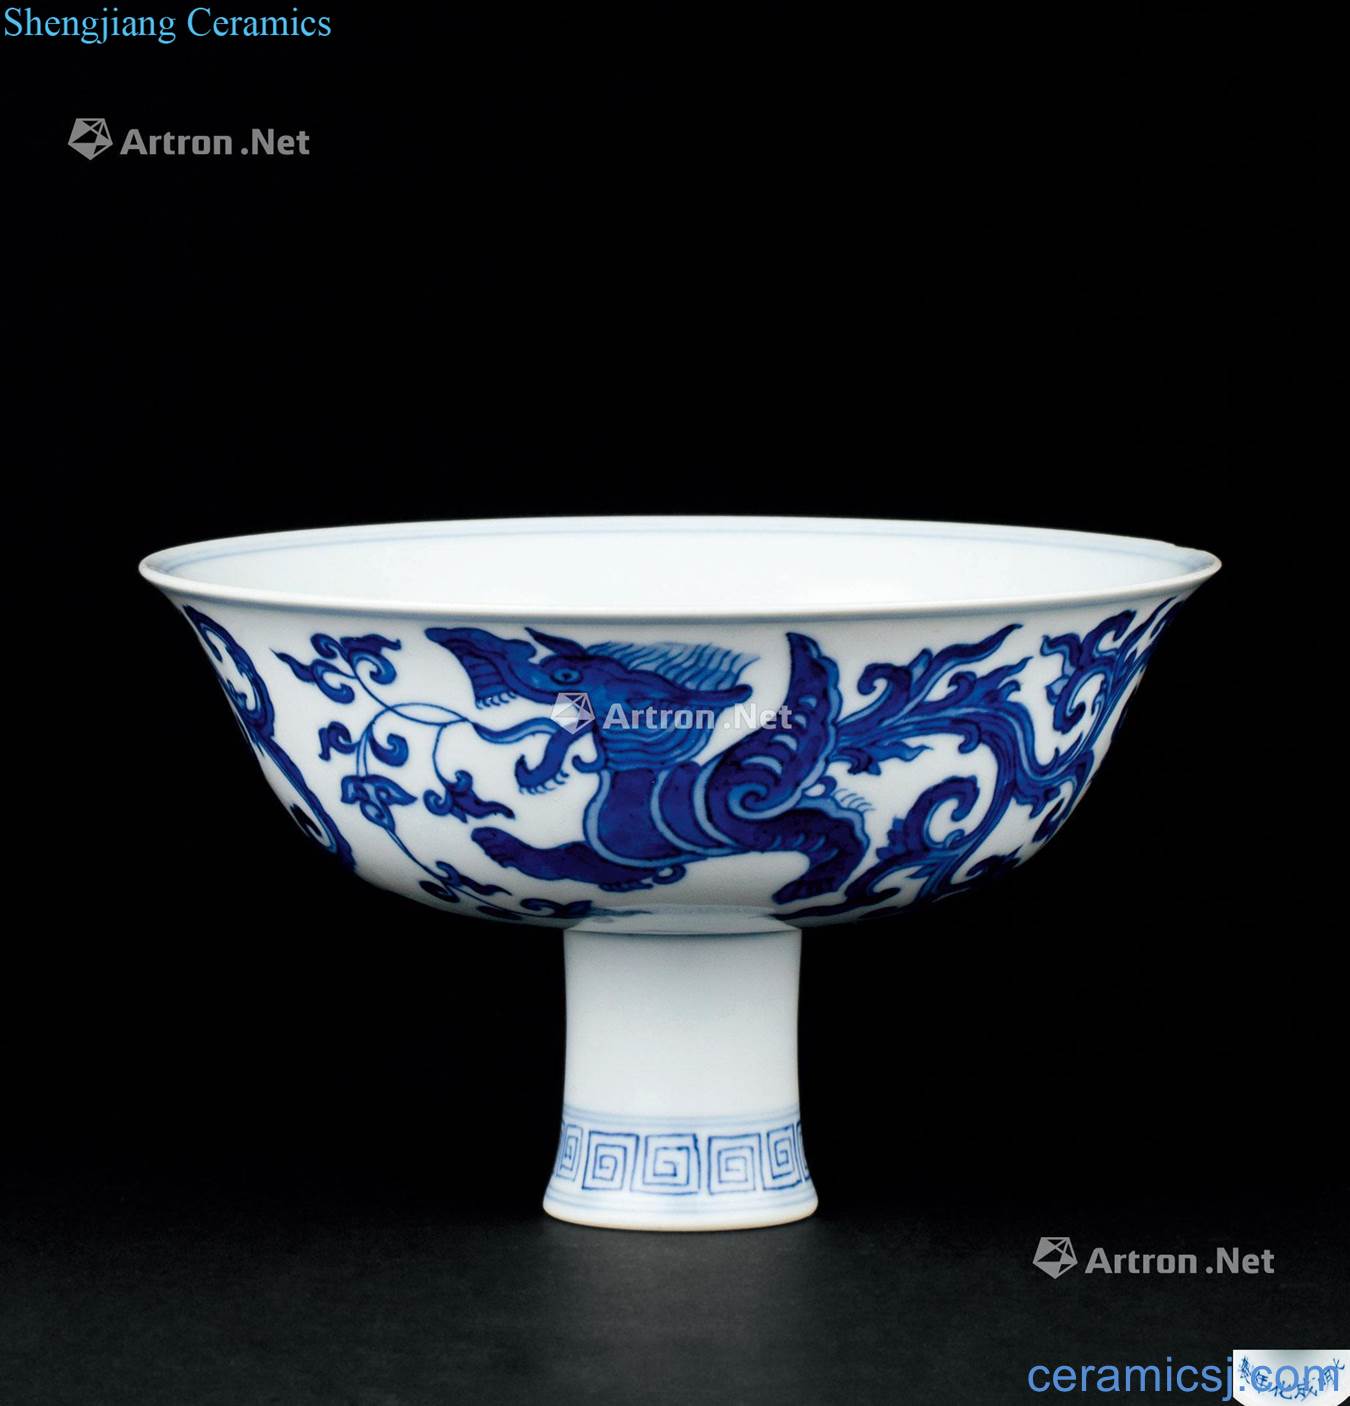 In the qing dynasty (1644-1911) blue and white dragon footed bowl